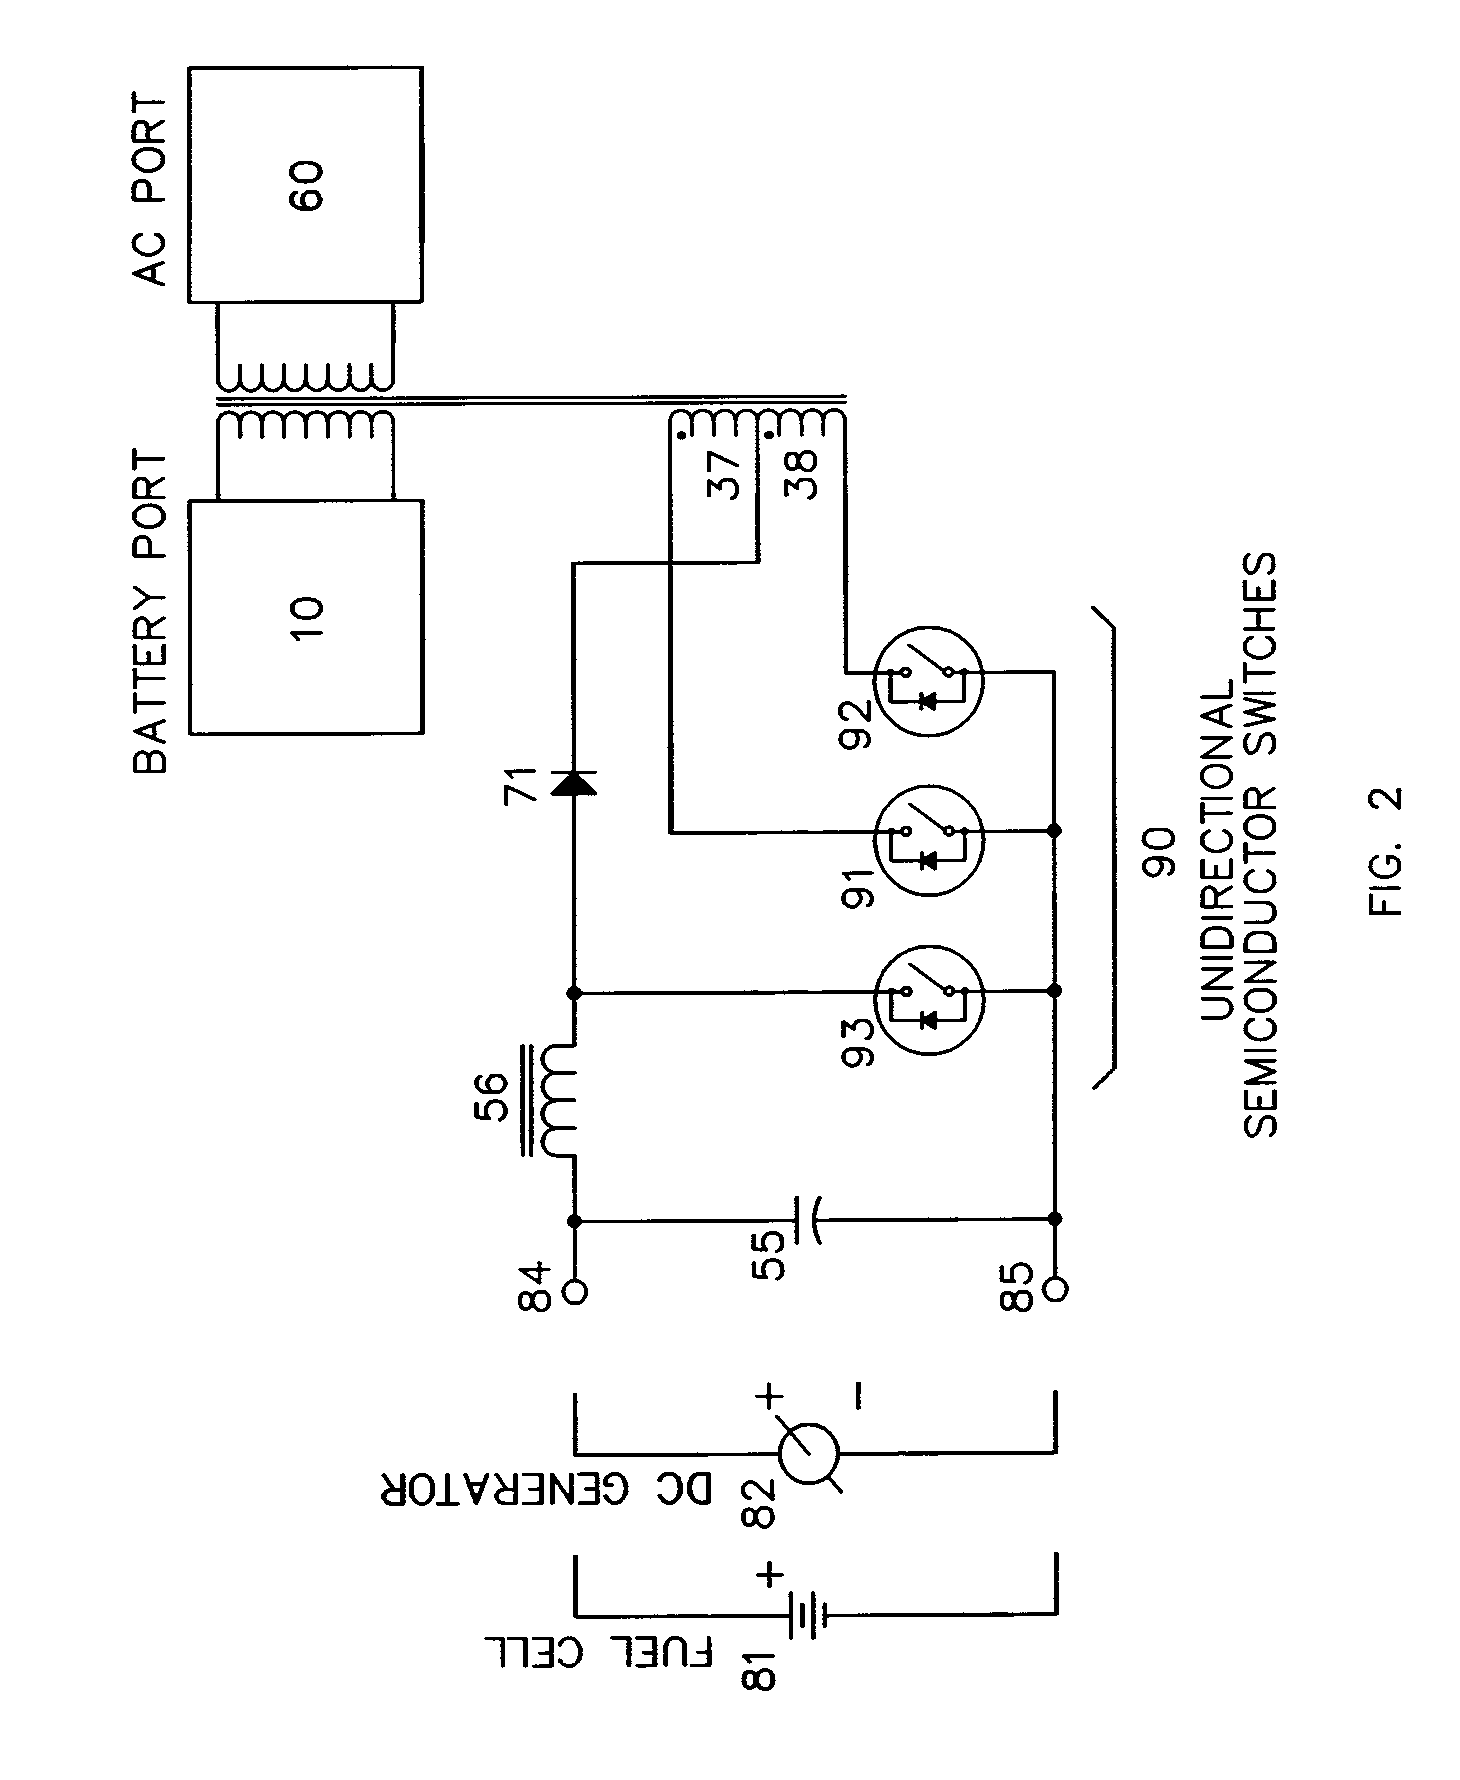 Bi-directional multi-port inverter with high frequency link transformer